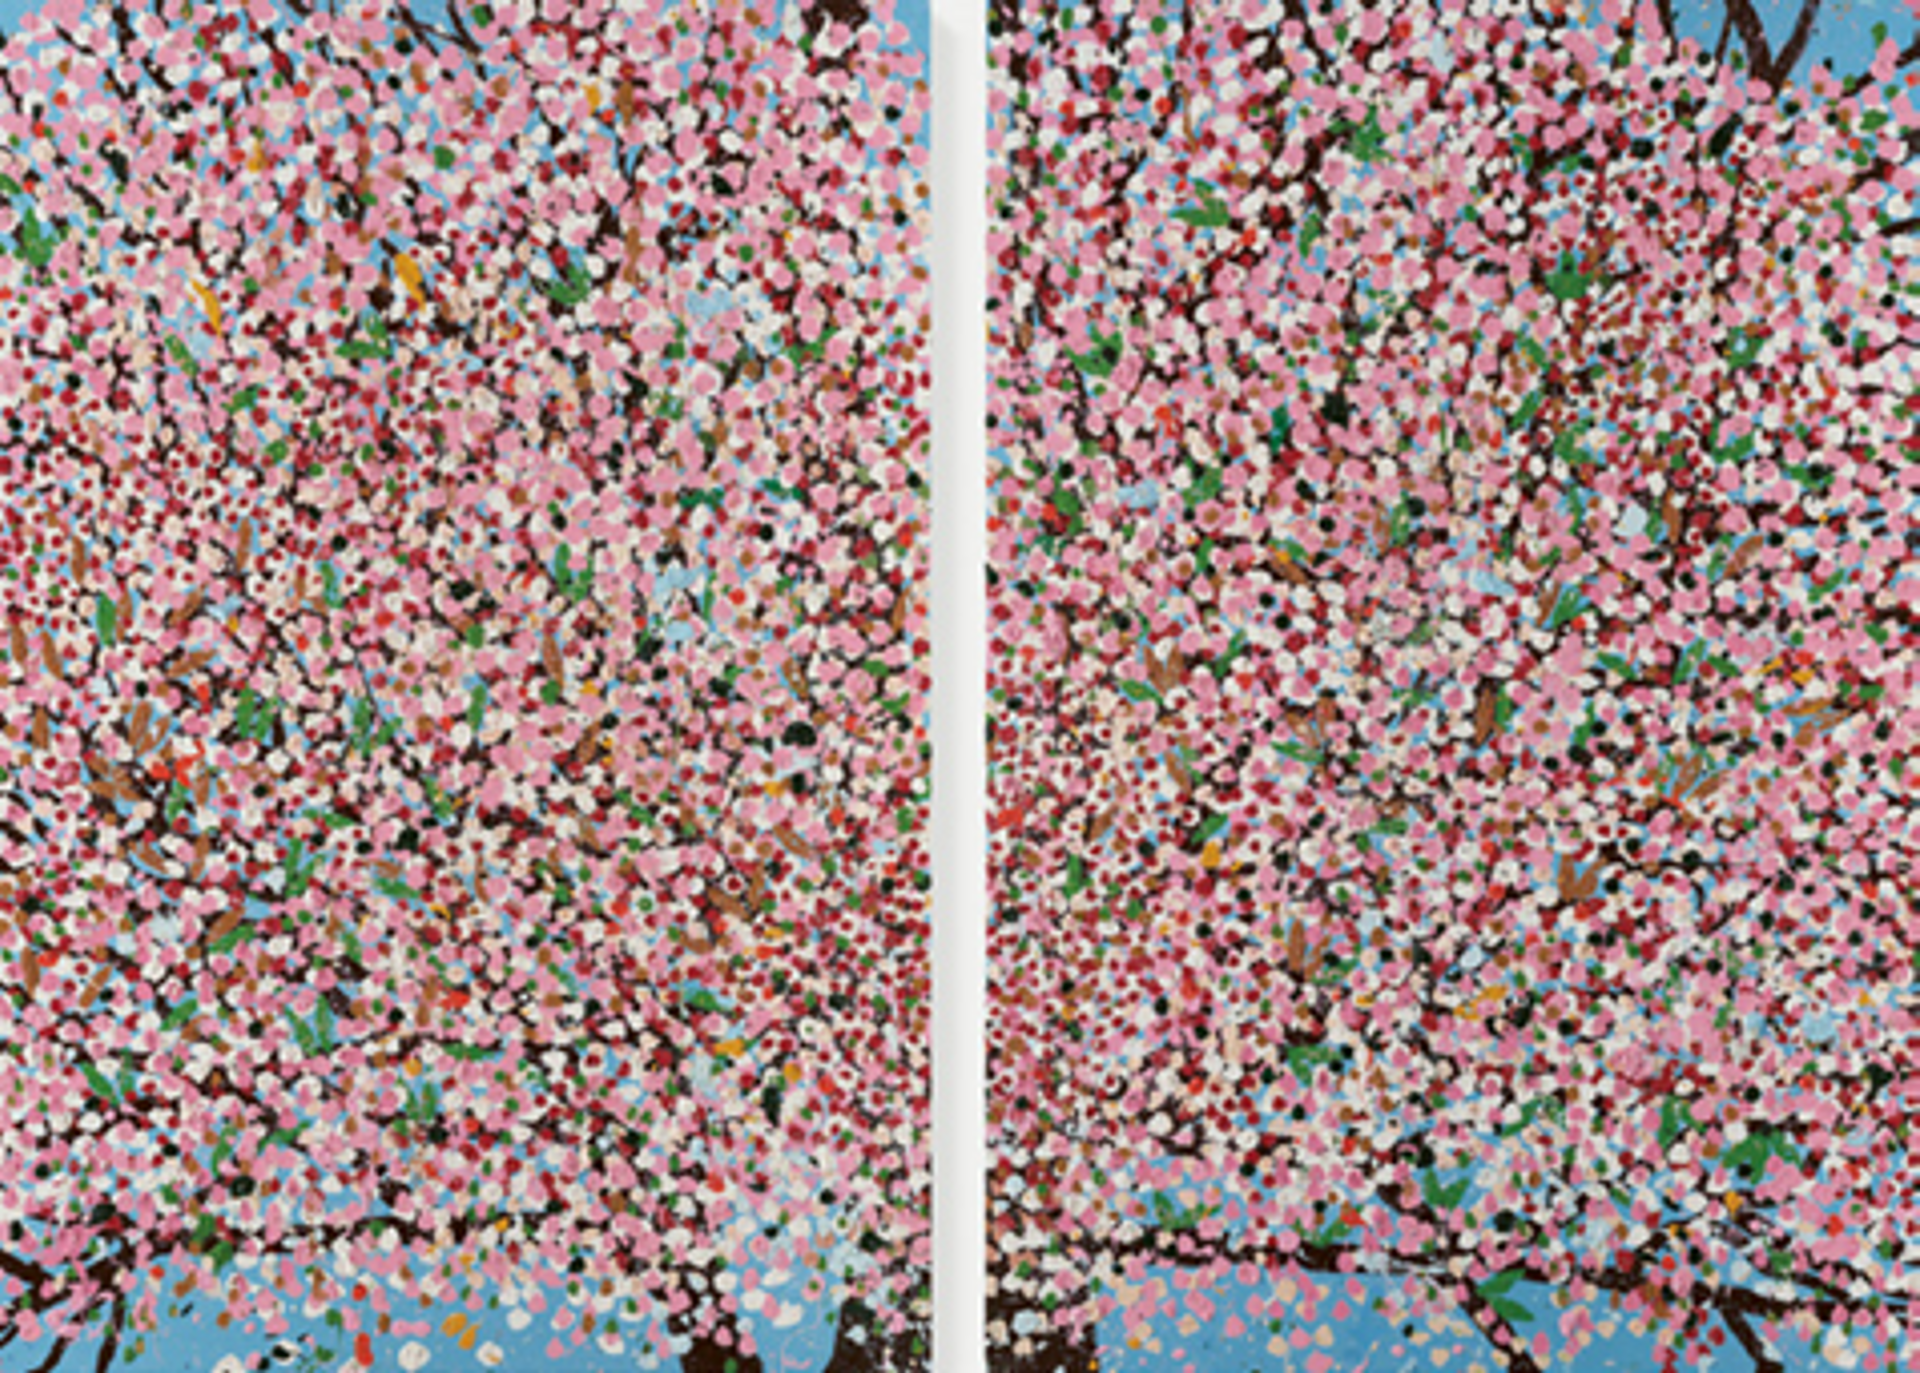 Damien Hirst, Renewal Blossom, 2018, huile sur toile. © Damien Hirst and ScienceLtd. Photo Prudence Cuming Associates